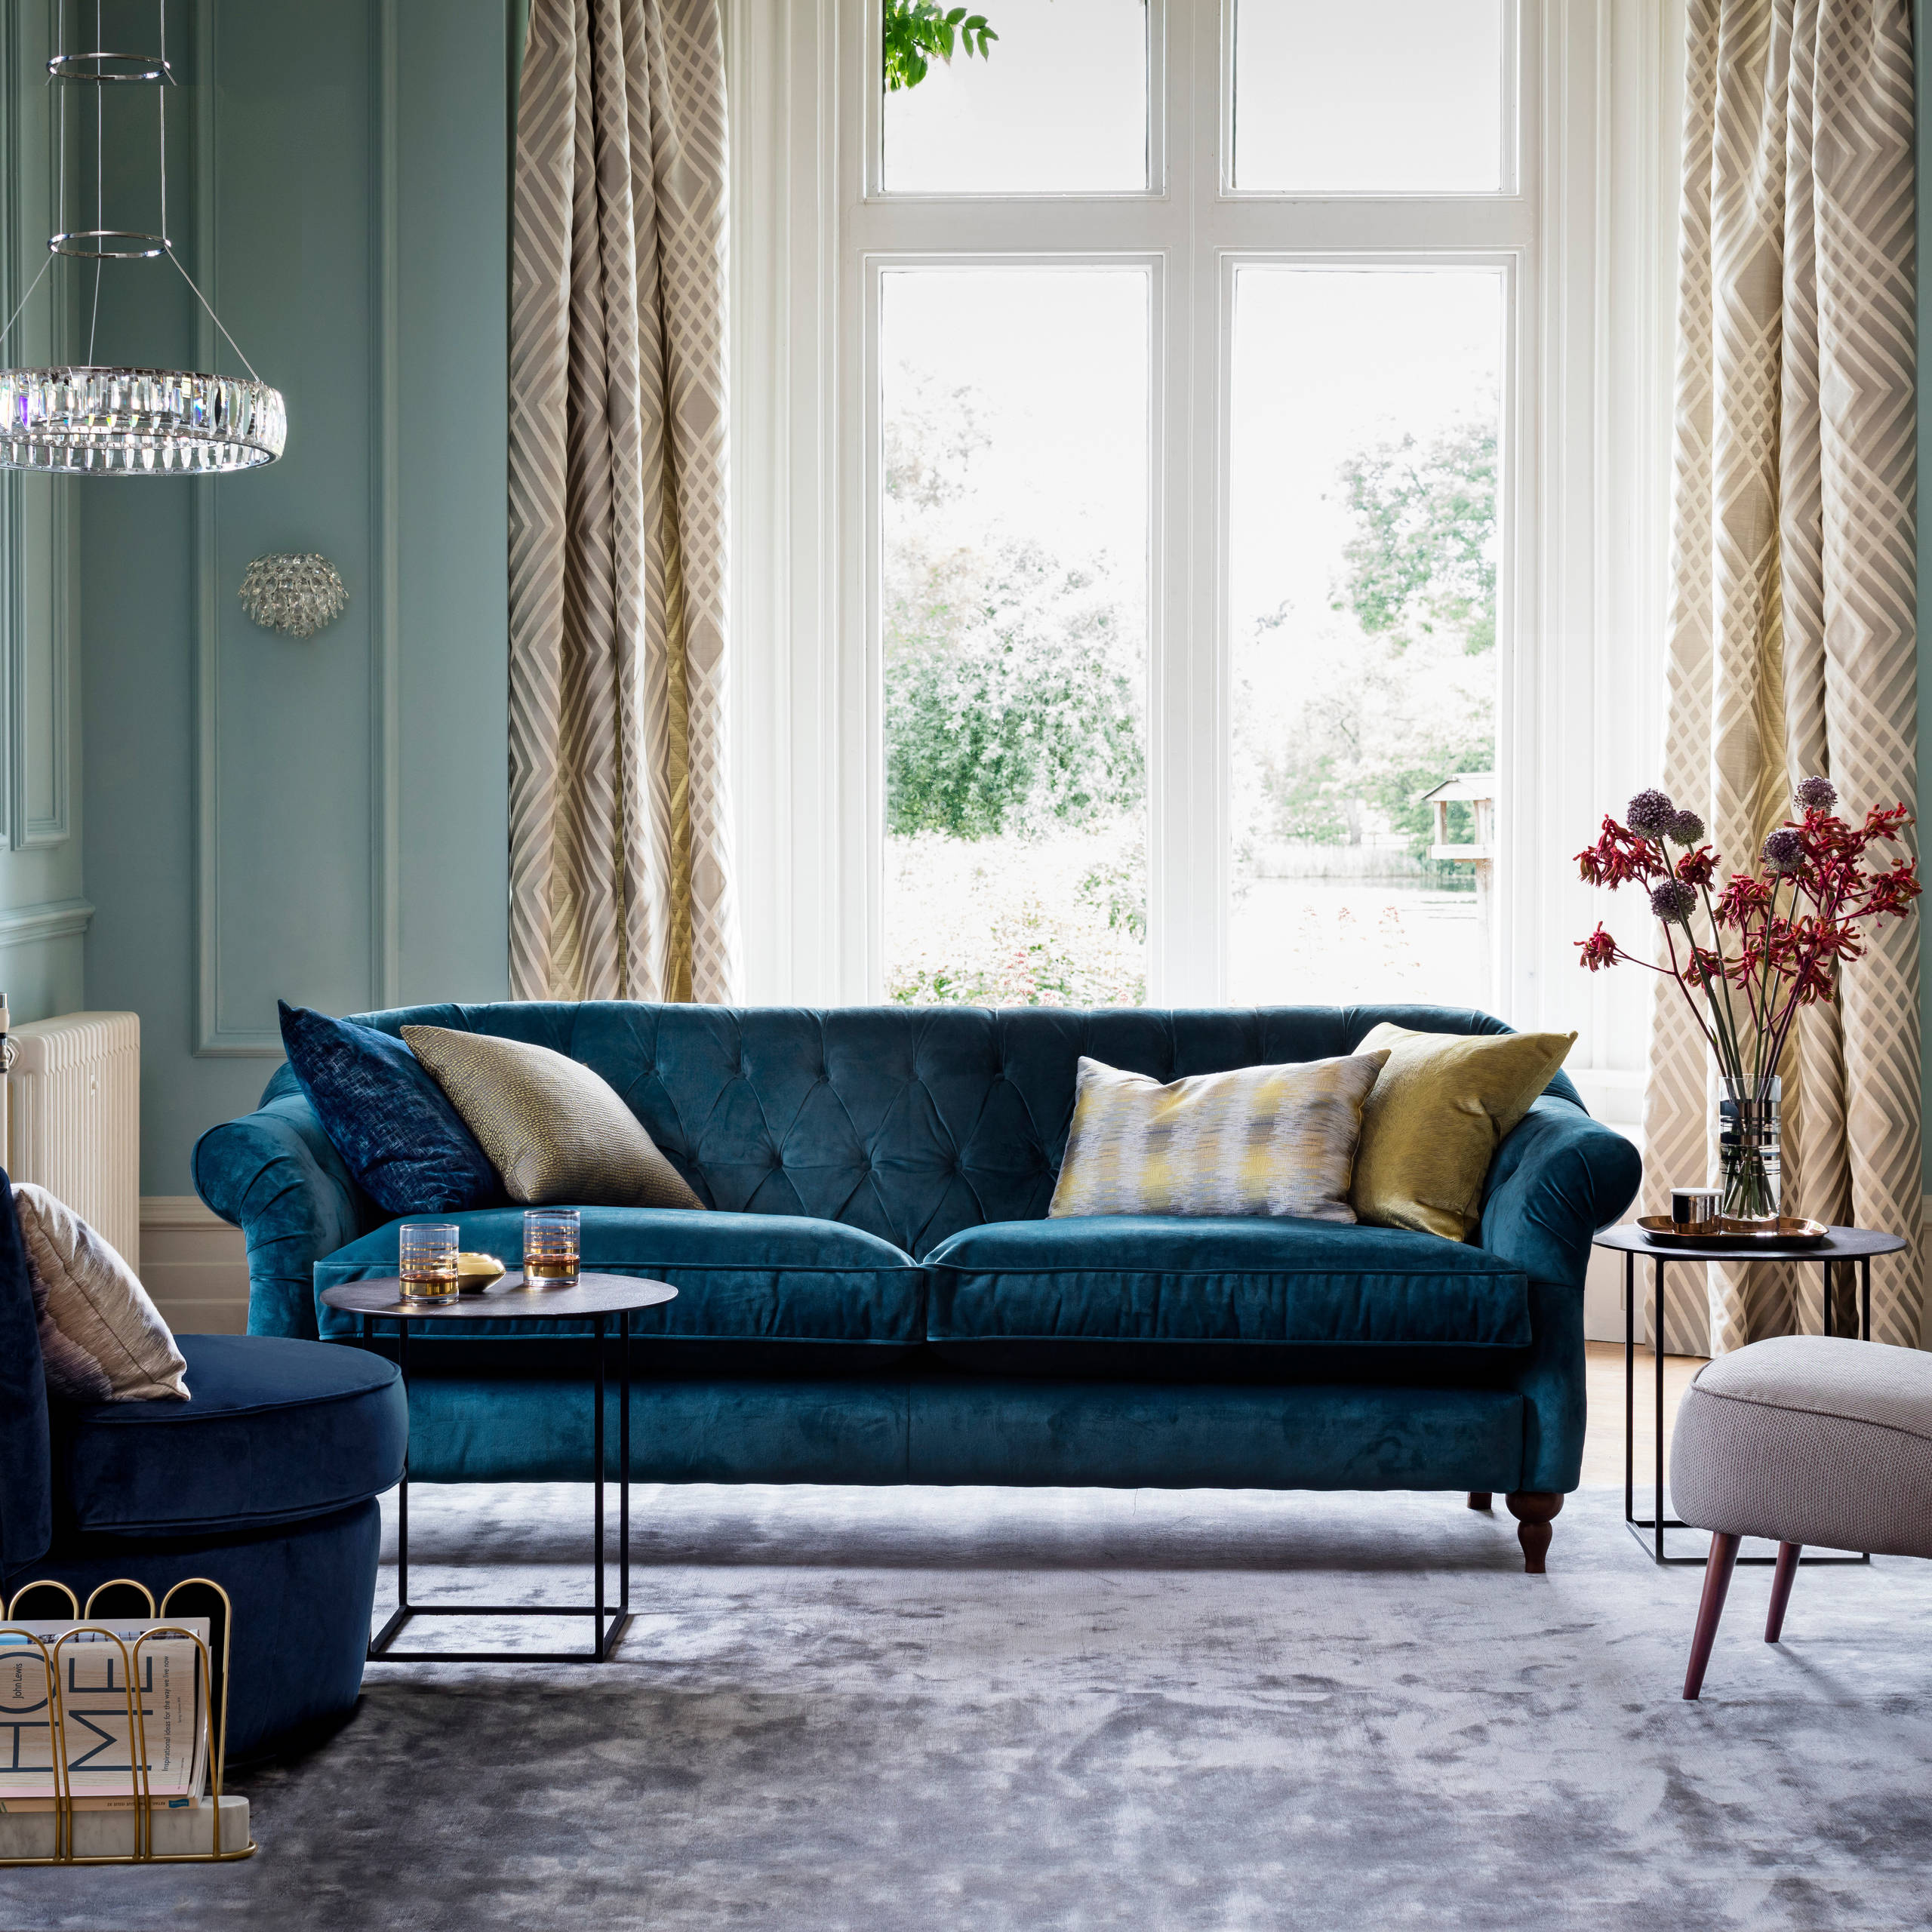 7 Essential Elements for an Art Deco-style Living Room | Houzz UK